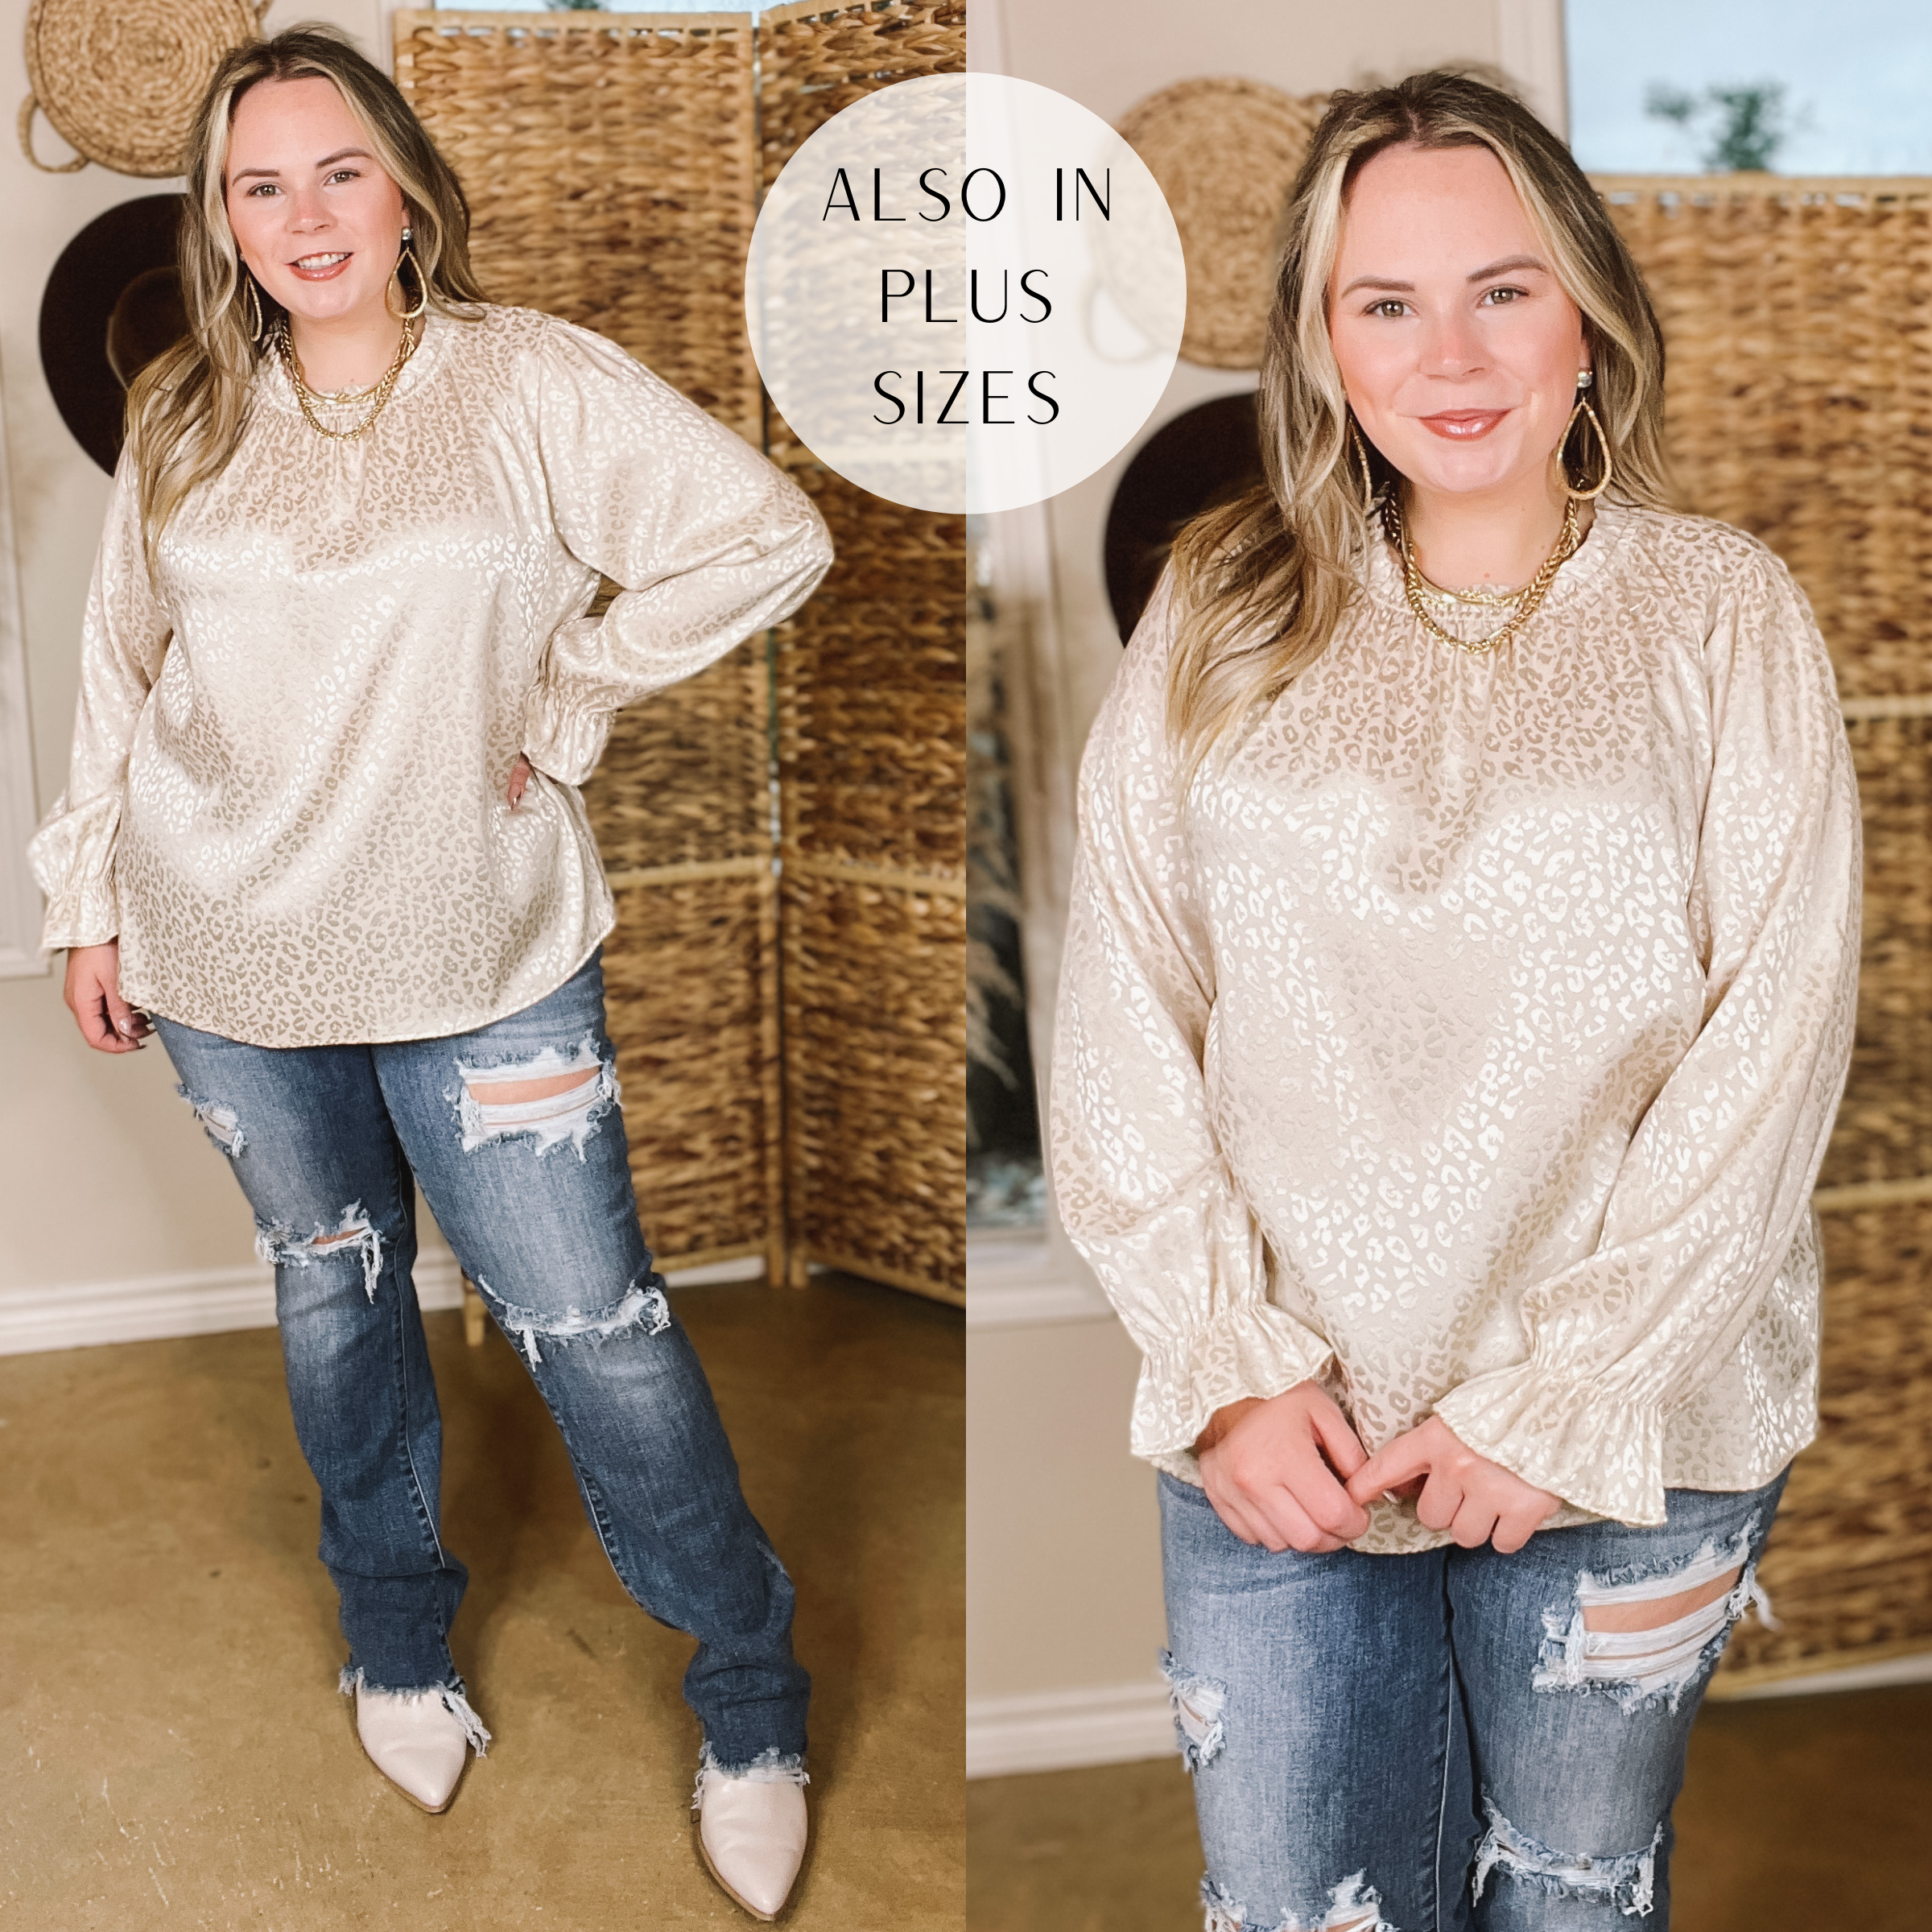 Model is wearing a ivory satin long sleeve shirt in a leopard print with ruffled cuffed sleeves around the wrist. Model is wearing white mules, distressed jeans, and has this outfit paired with gold jewelry. The background is hues of brown and white.  